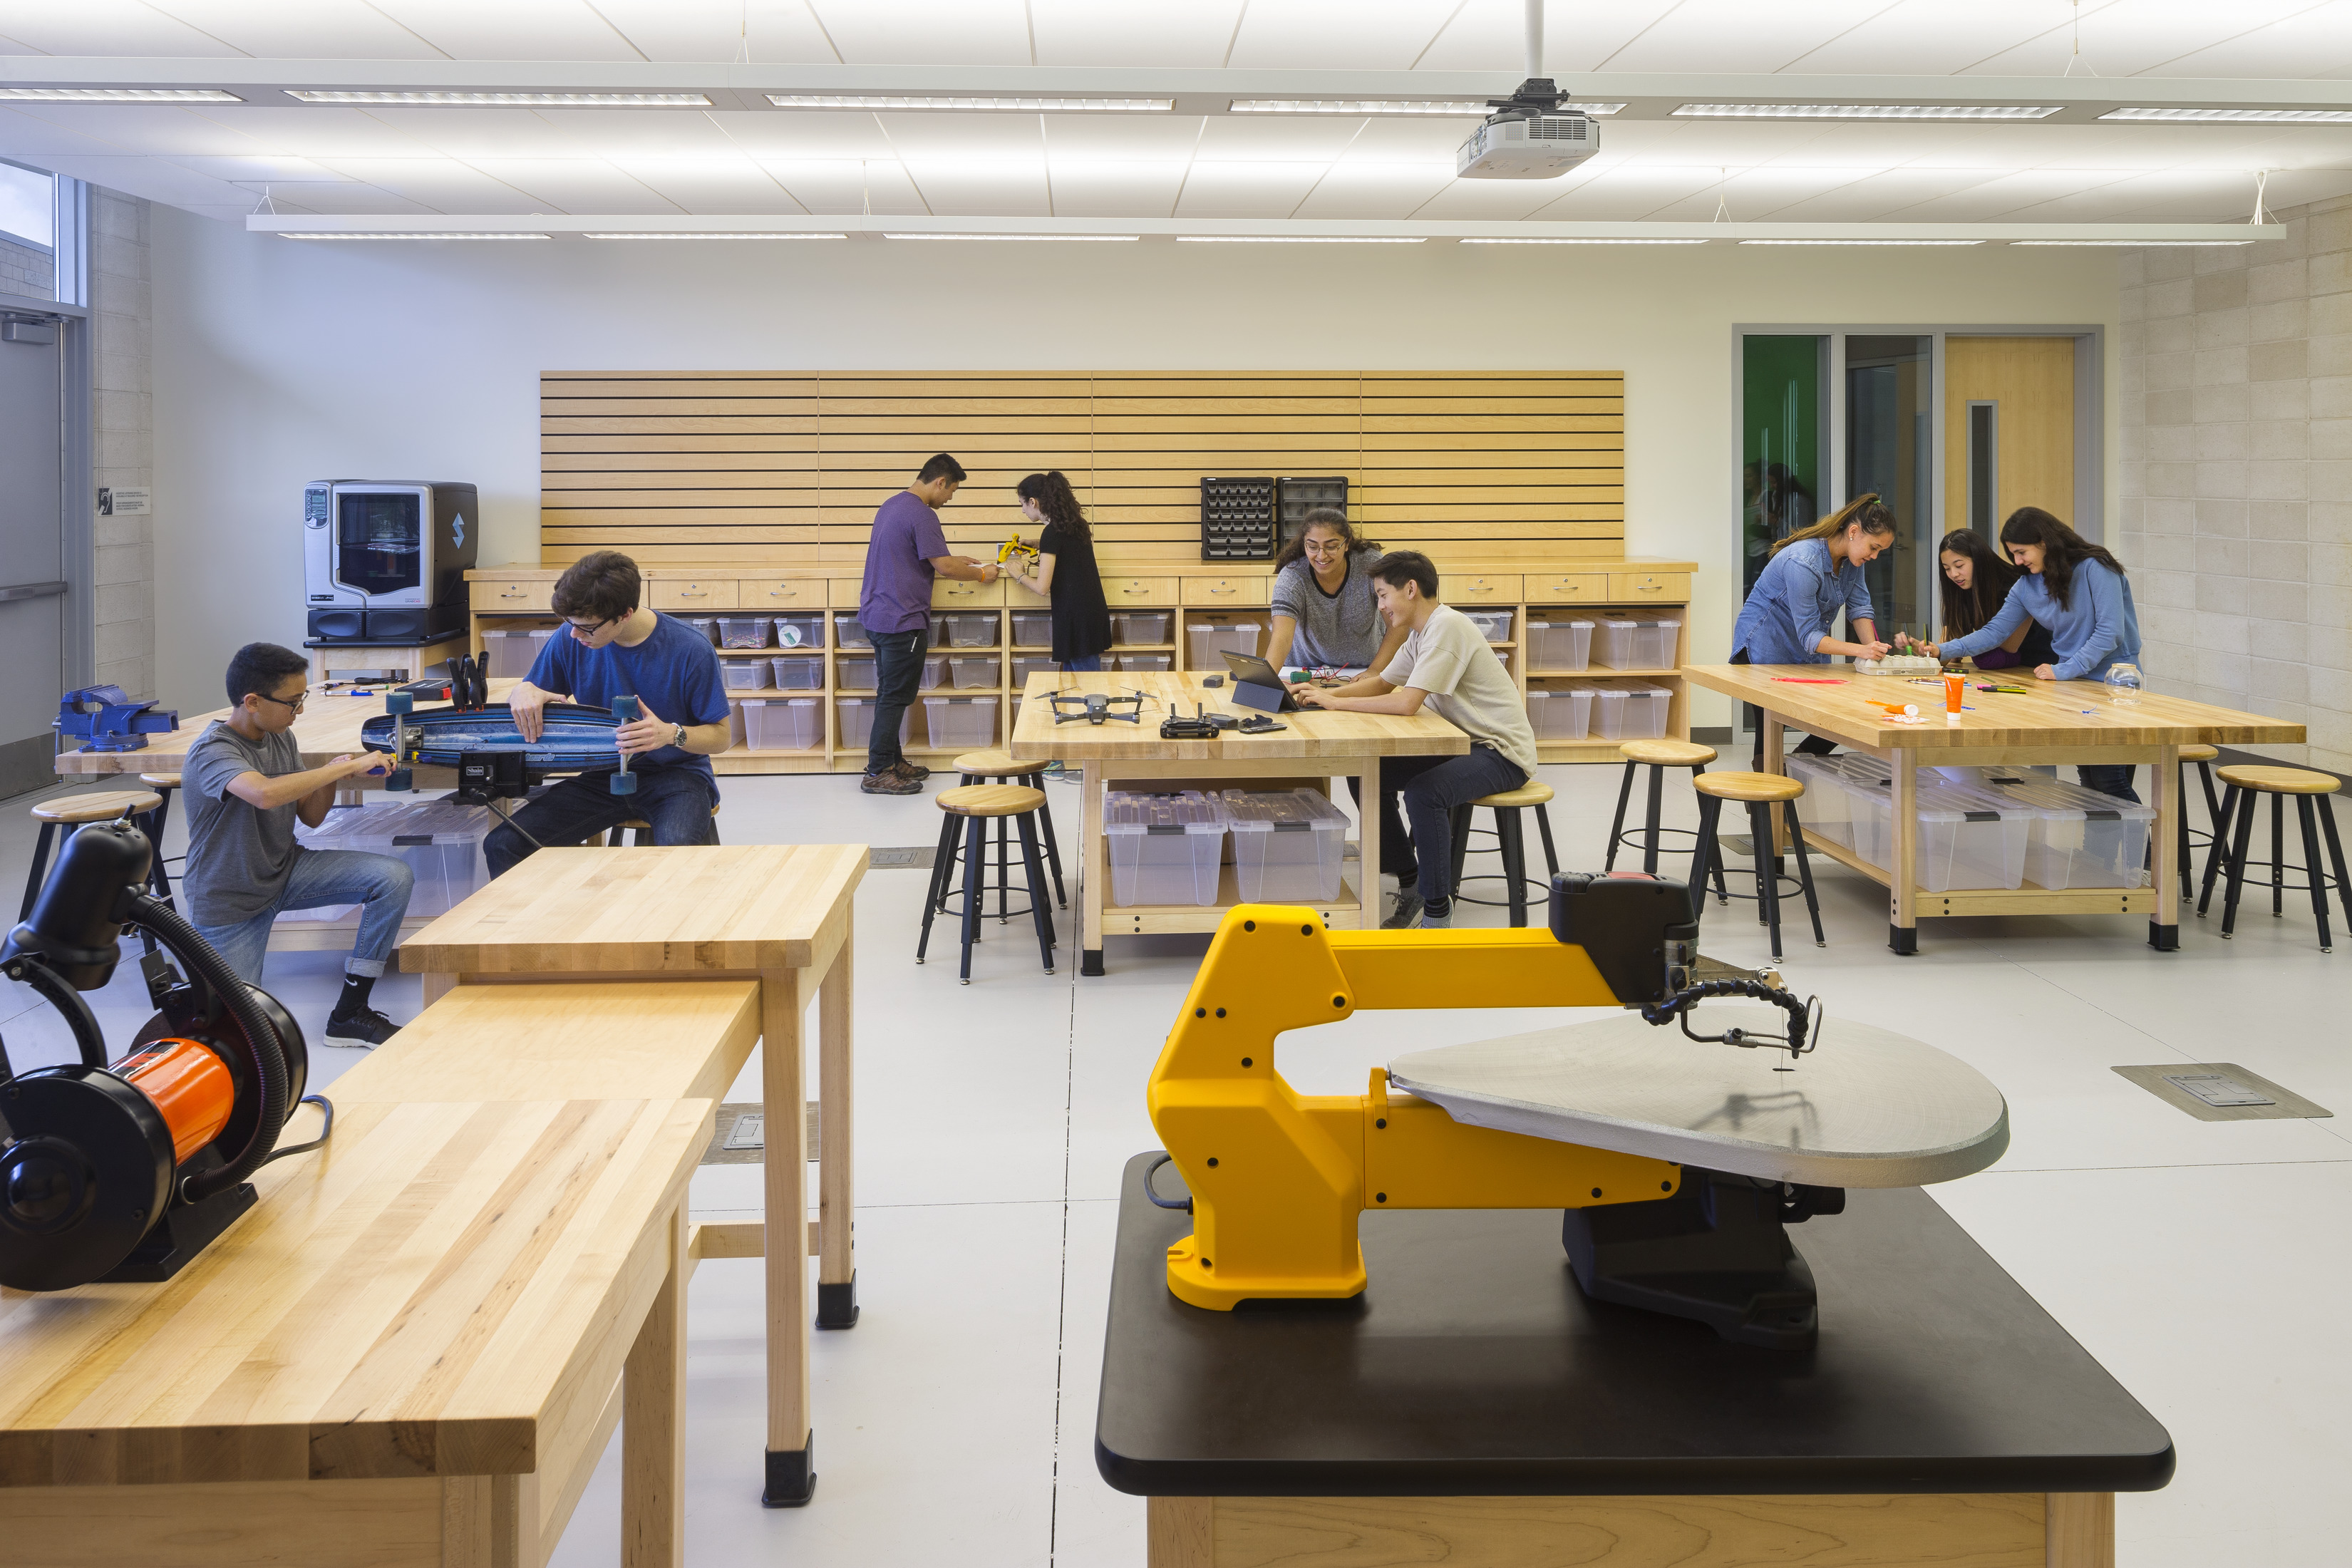 Portola High School Maker Space is embracing cultural diversity through architecture with its innovative use of space.